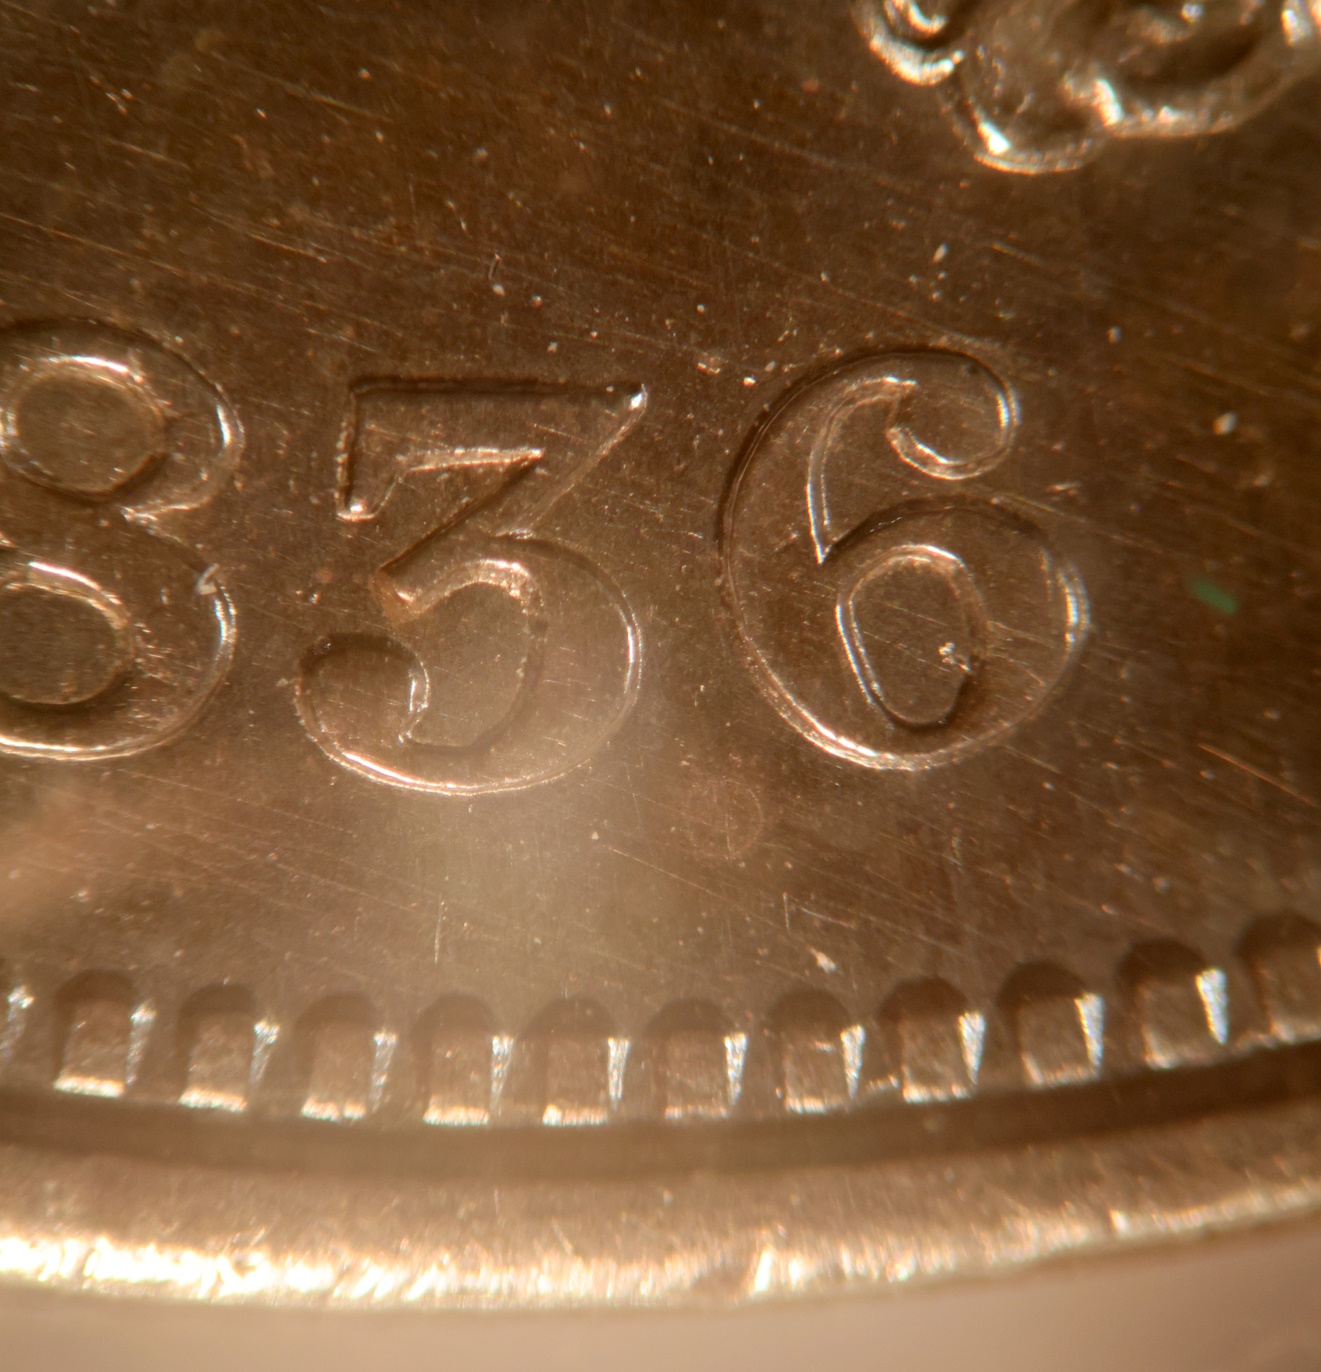 36 Of the date 1836